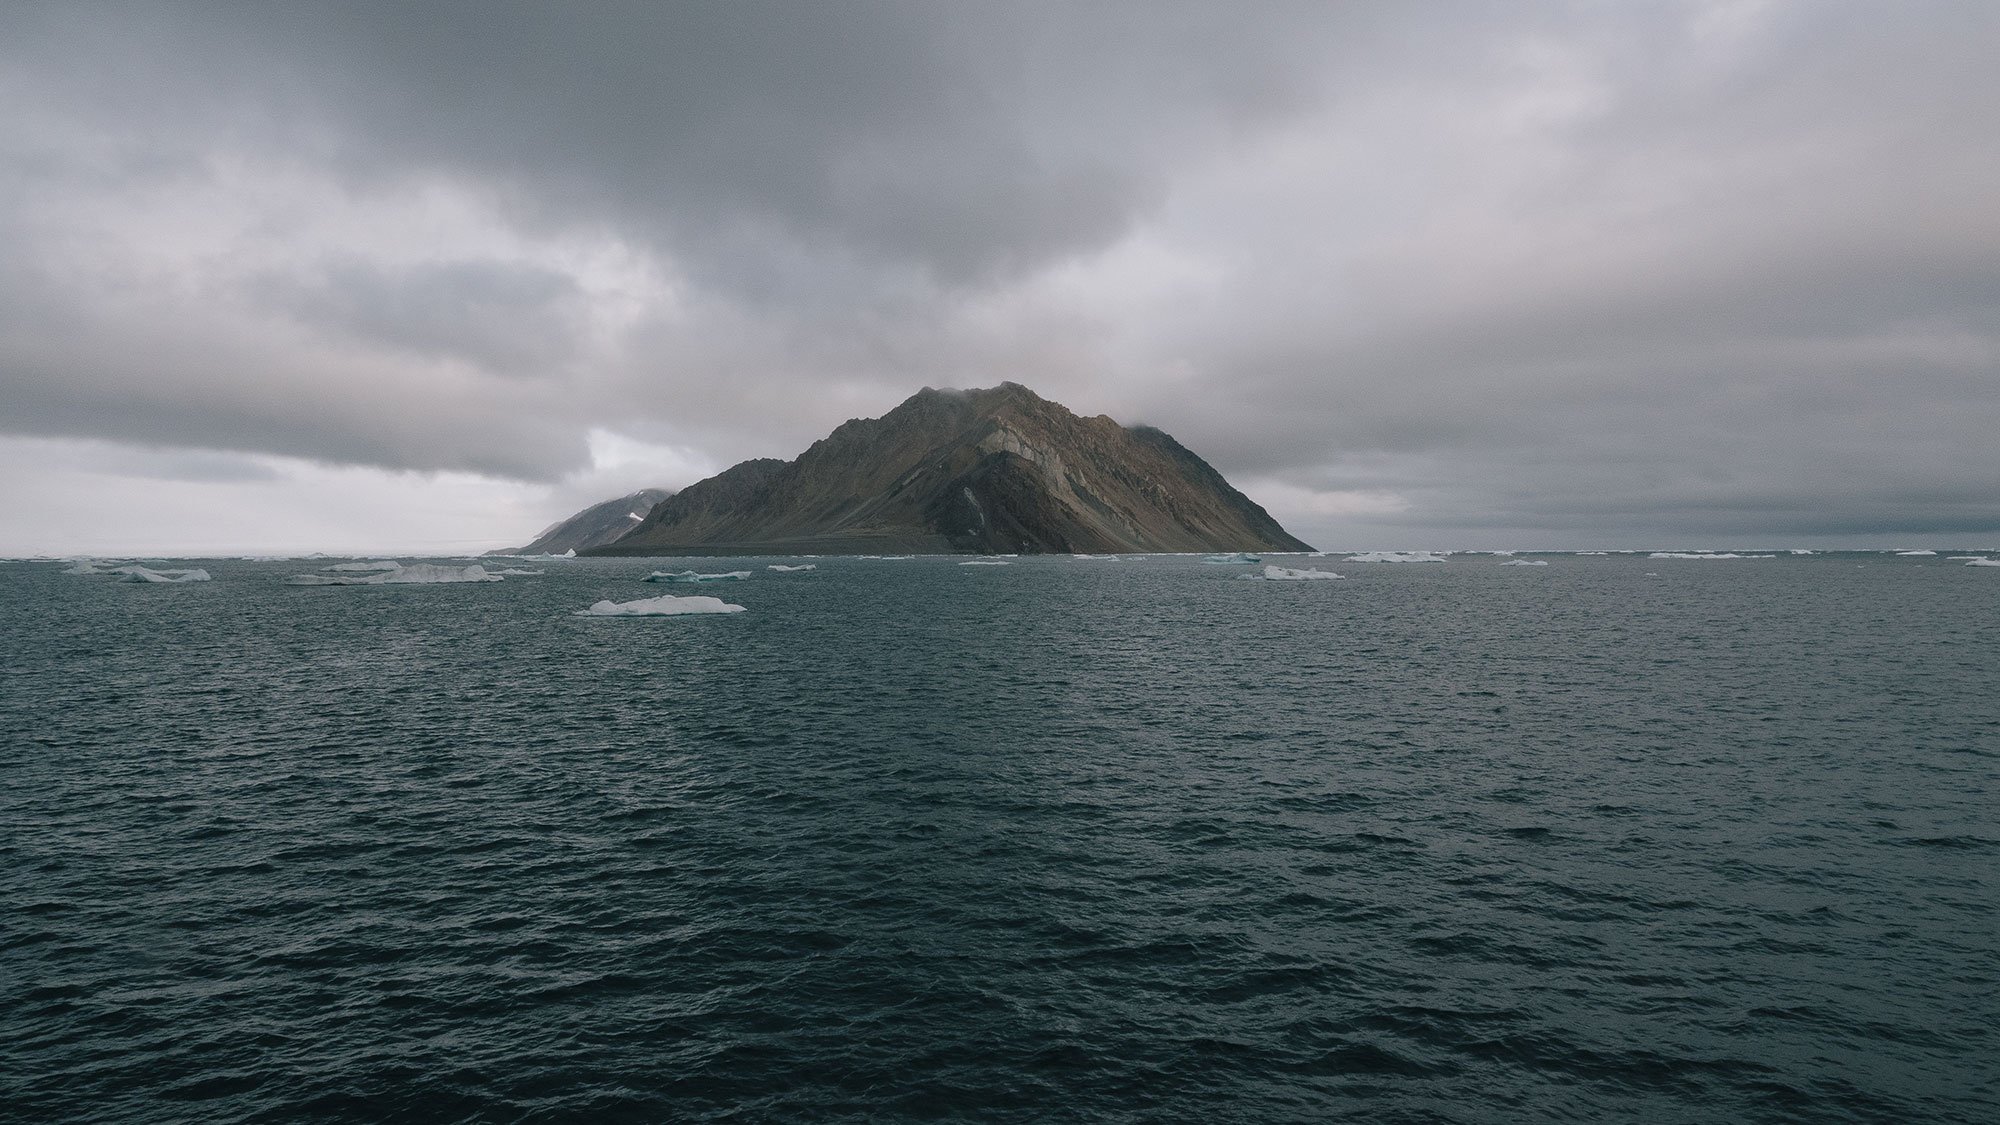 Because of its remoteness and terrain, Ellesmere Island is best accessed by polar expedition vessel. 